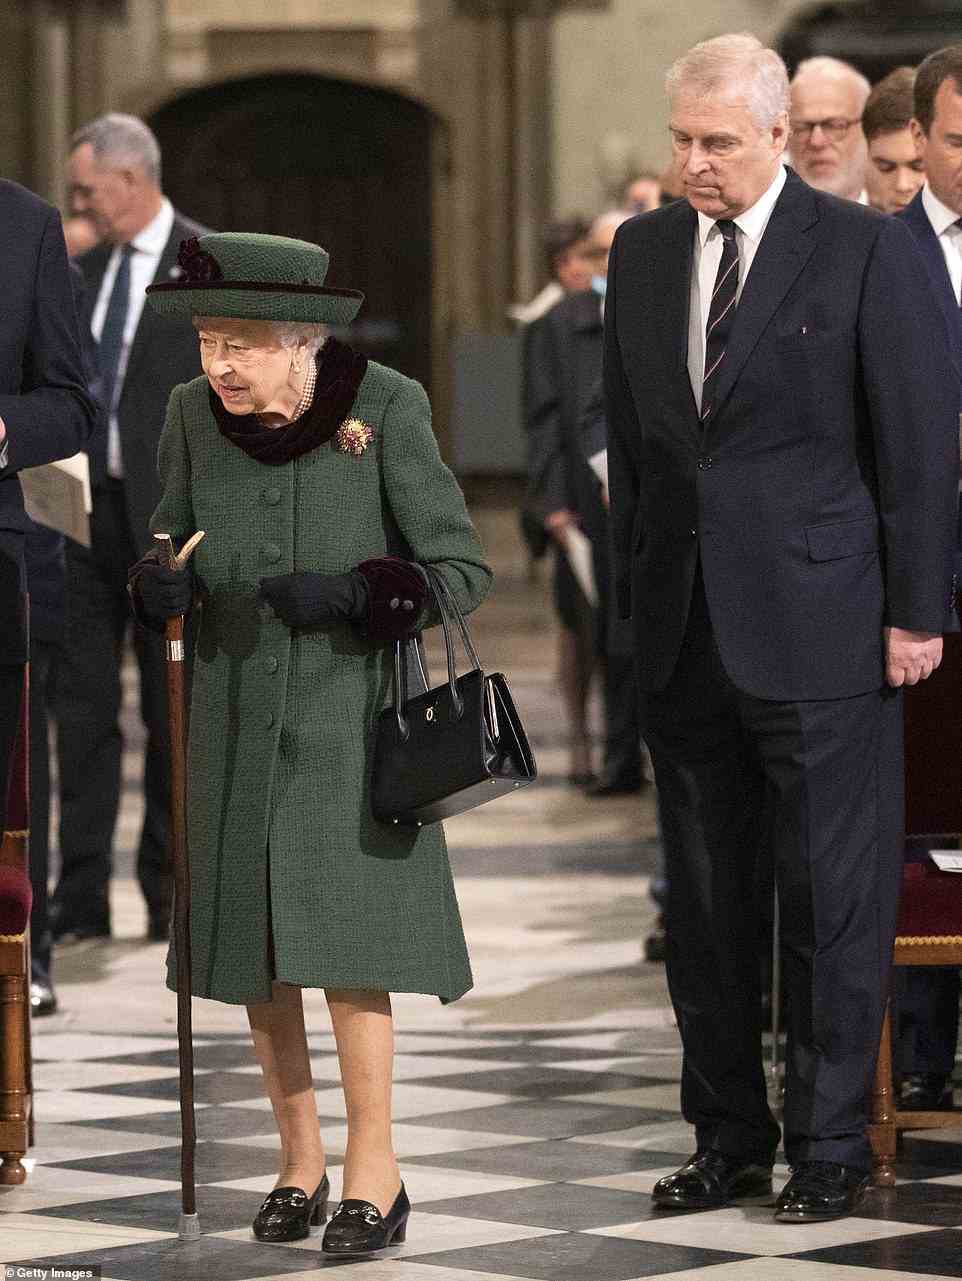 It comes as senior royals are concerned Andrew is looking to strong-arm his way into making an appearance at the Platinum Jubilee celebrations in an attempt to revive his reputation after he insisted on accompanying the Queen from Windsor Castle to Westminster Abbey on Tuesday